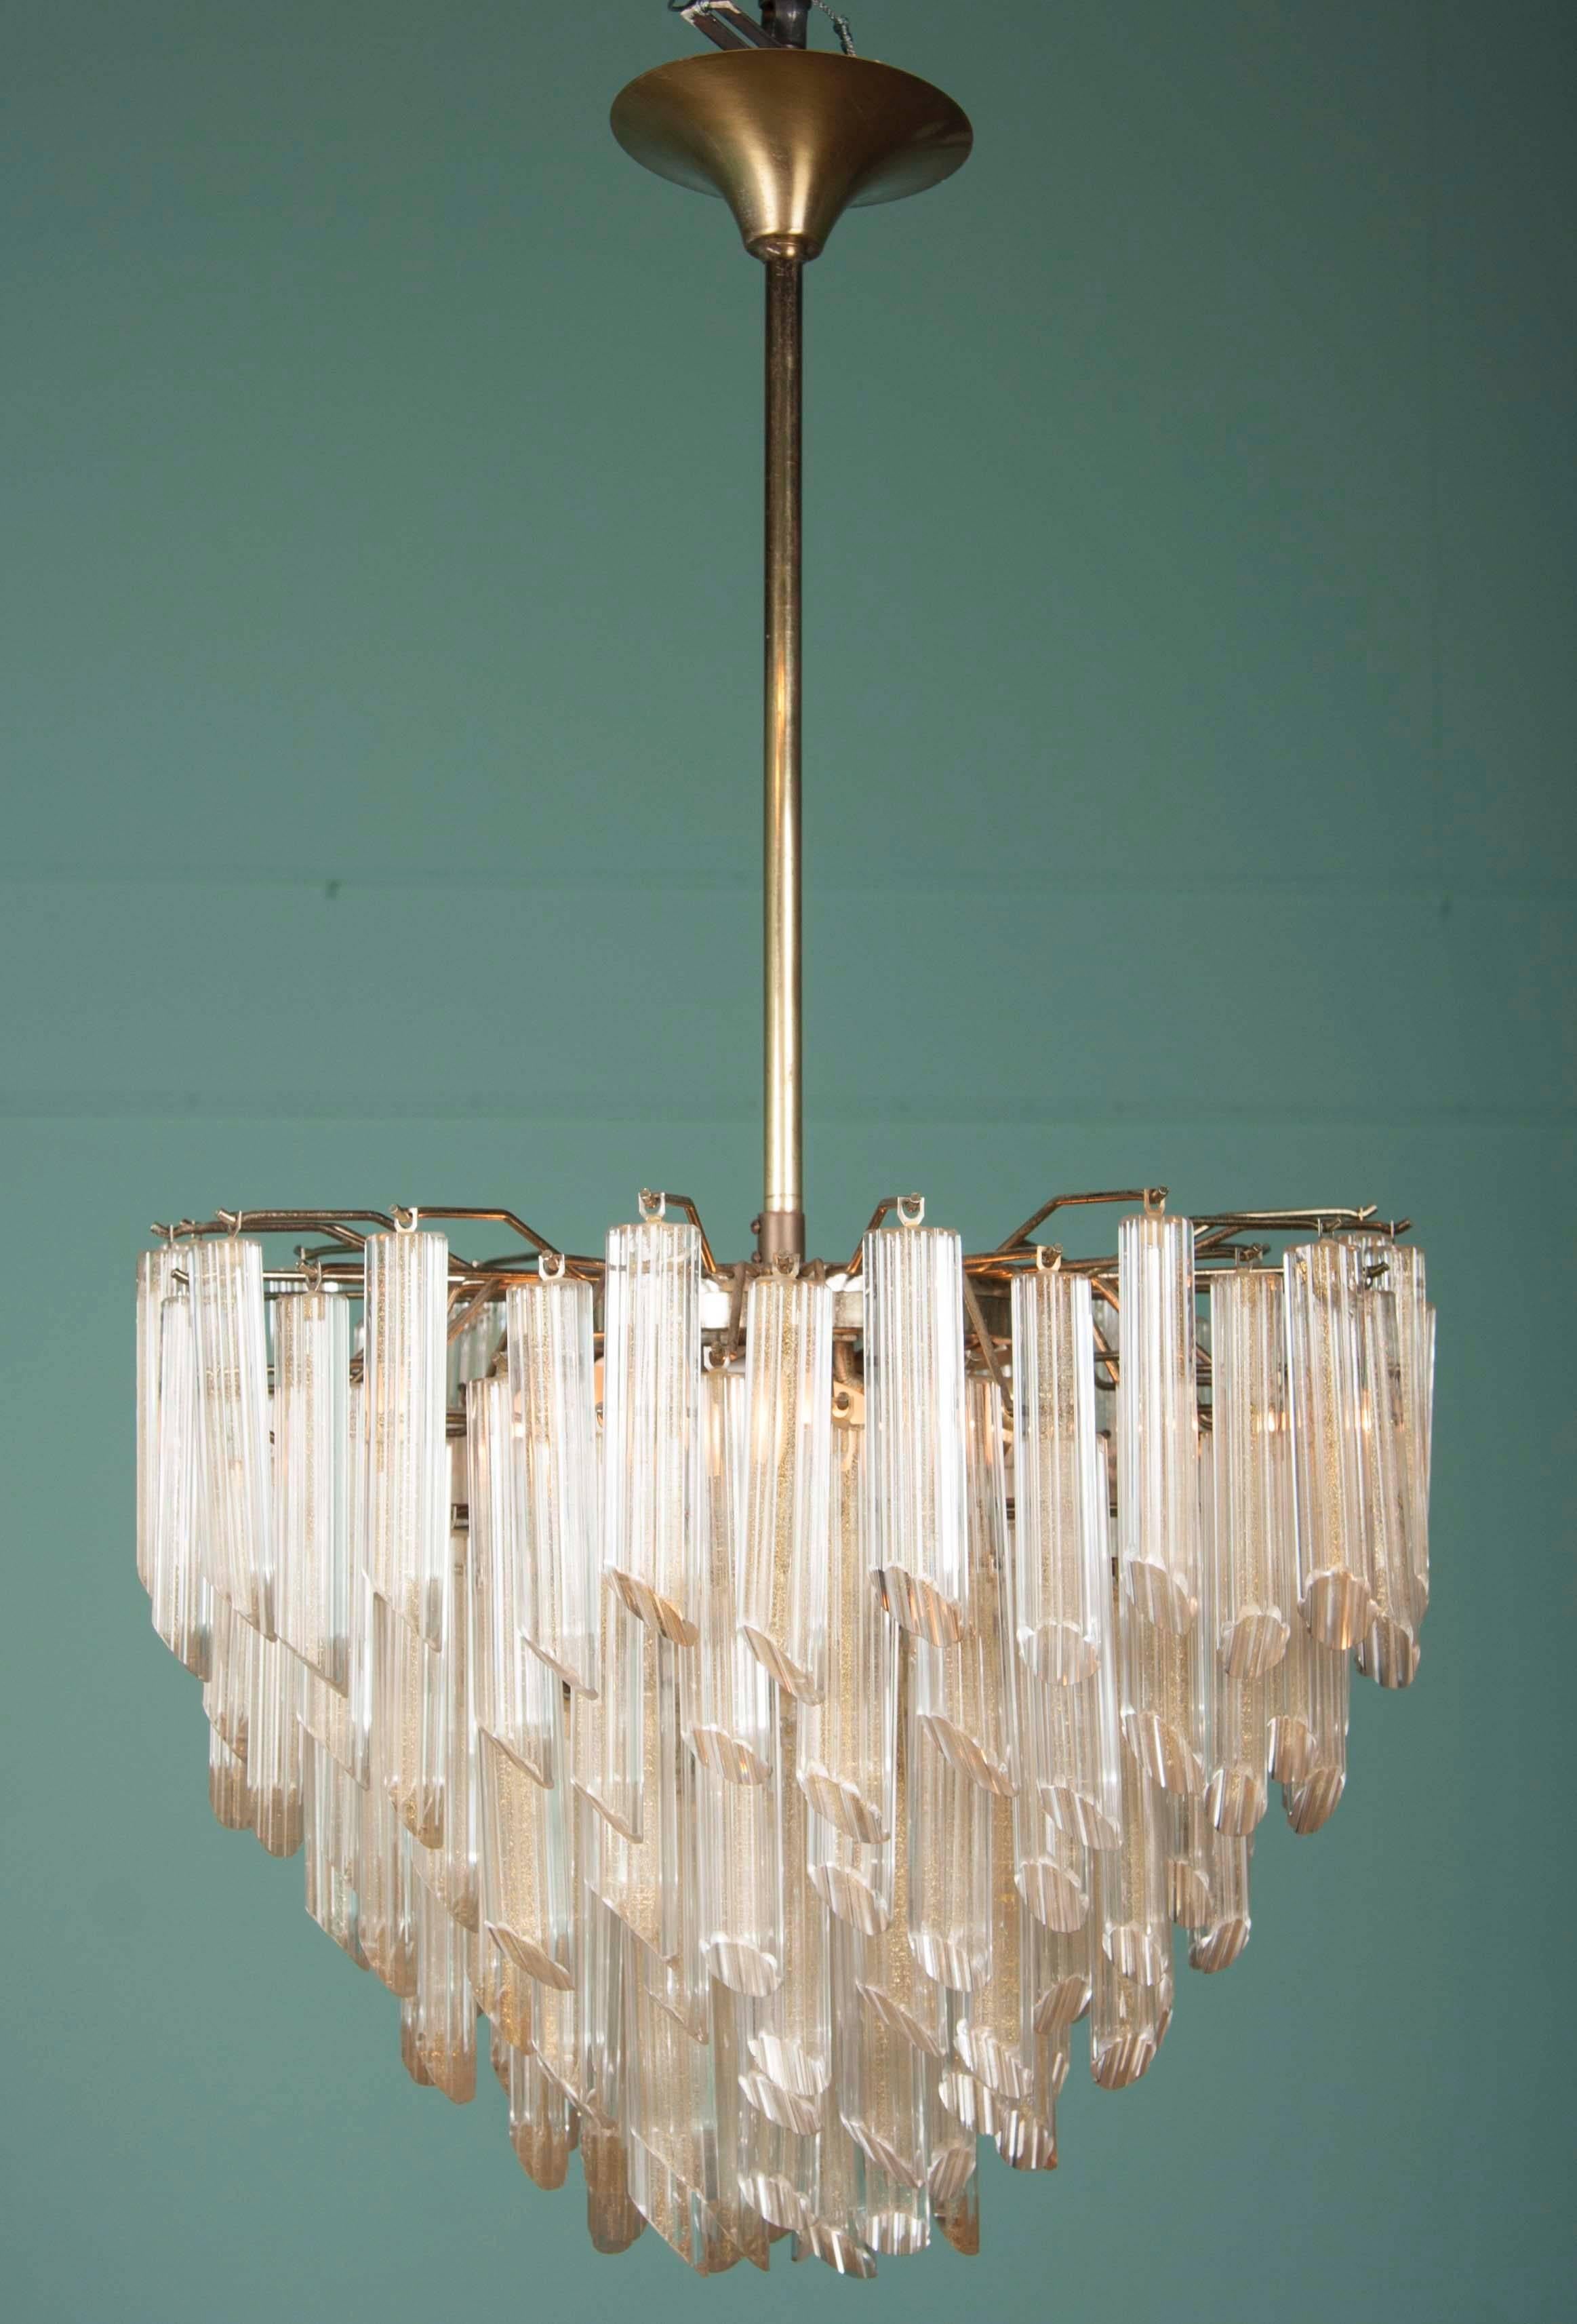 A magnificent Mid-Century Modern chandelier of tiered Murano glass prisms with gold inclusions by the Camer Glass Company.

Height of chandelier body : 17